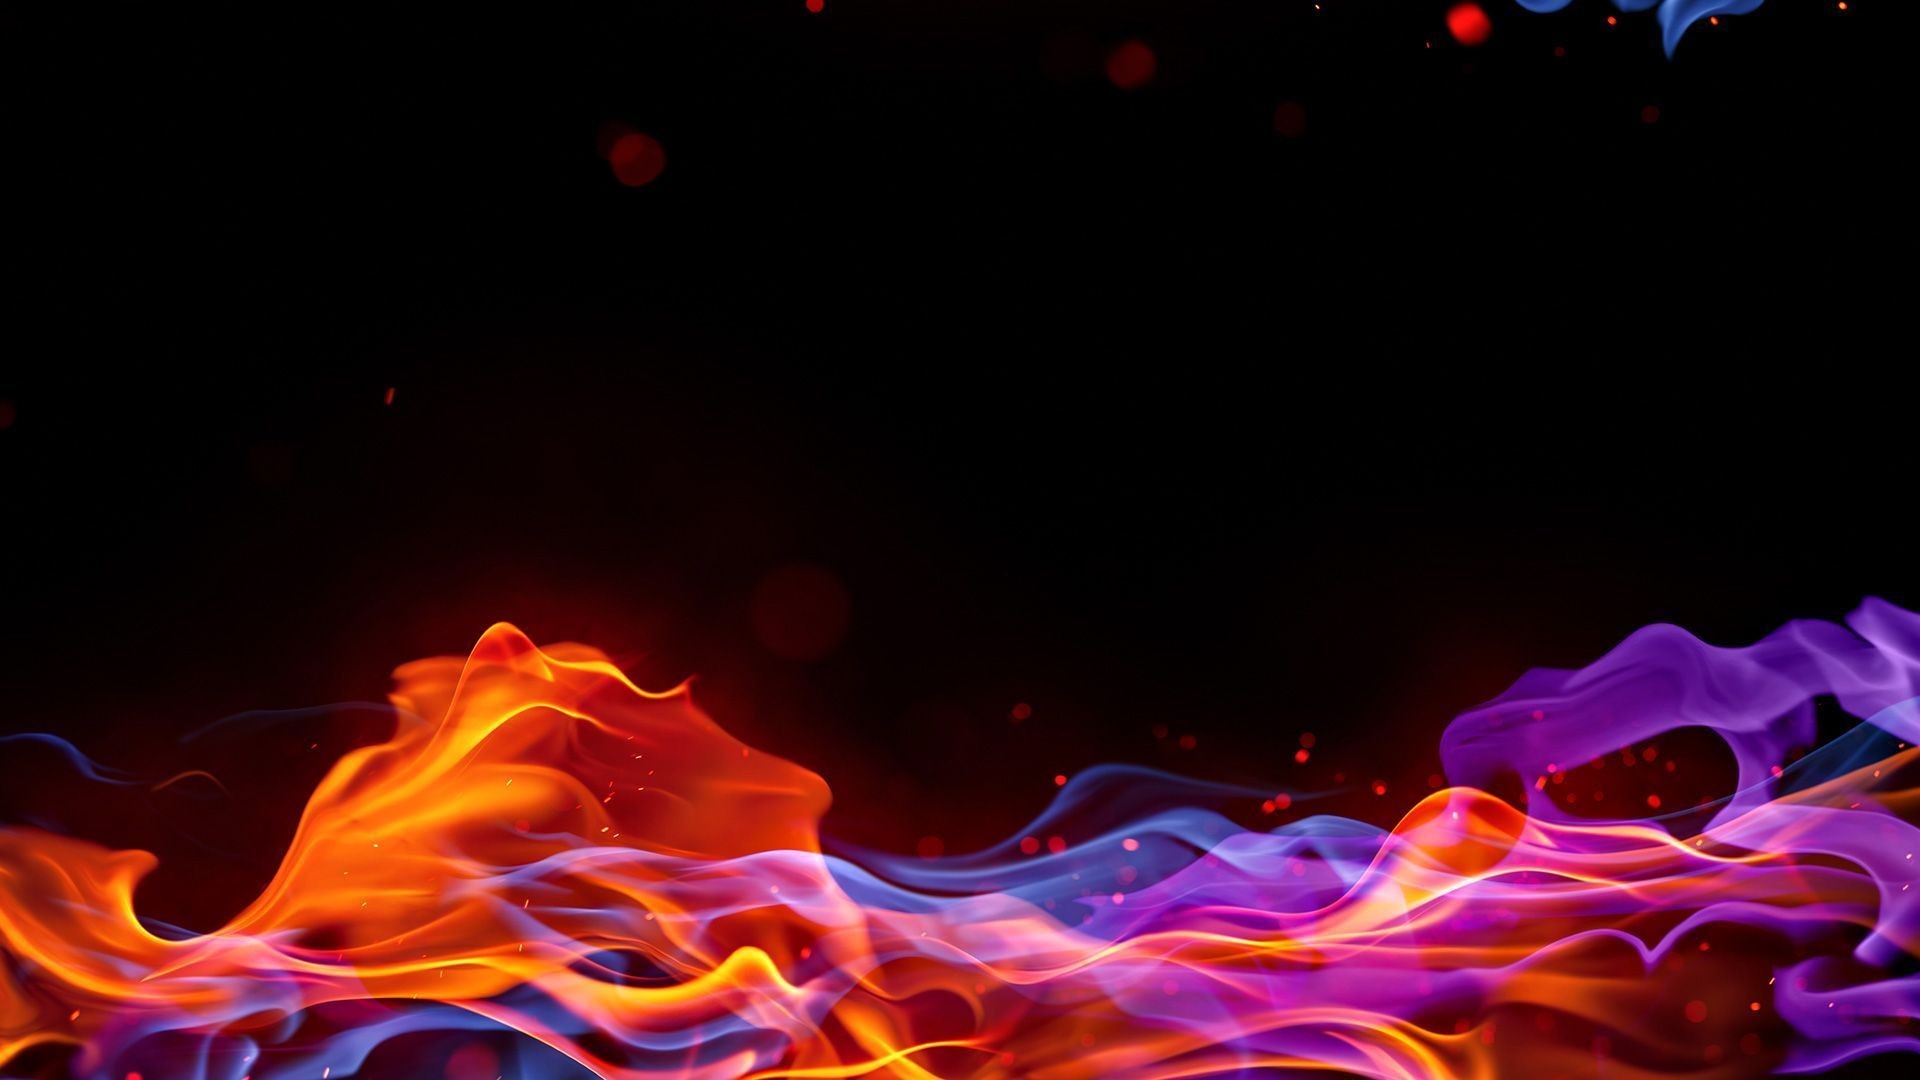 Blue And Red Fire Background wallpaper 186027